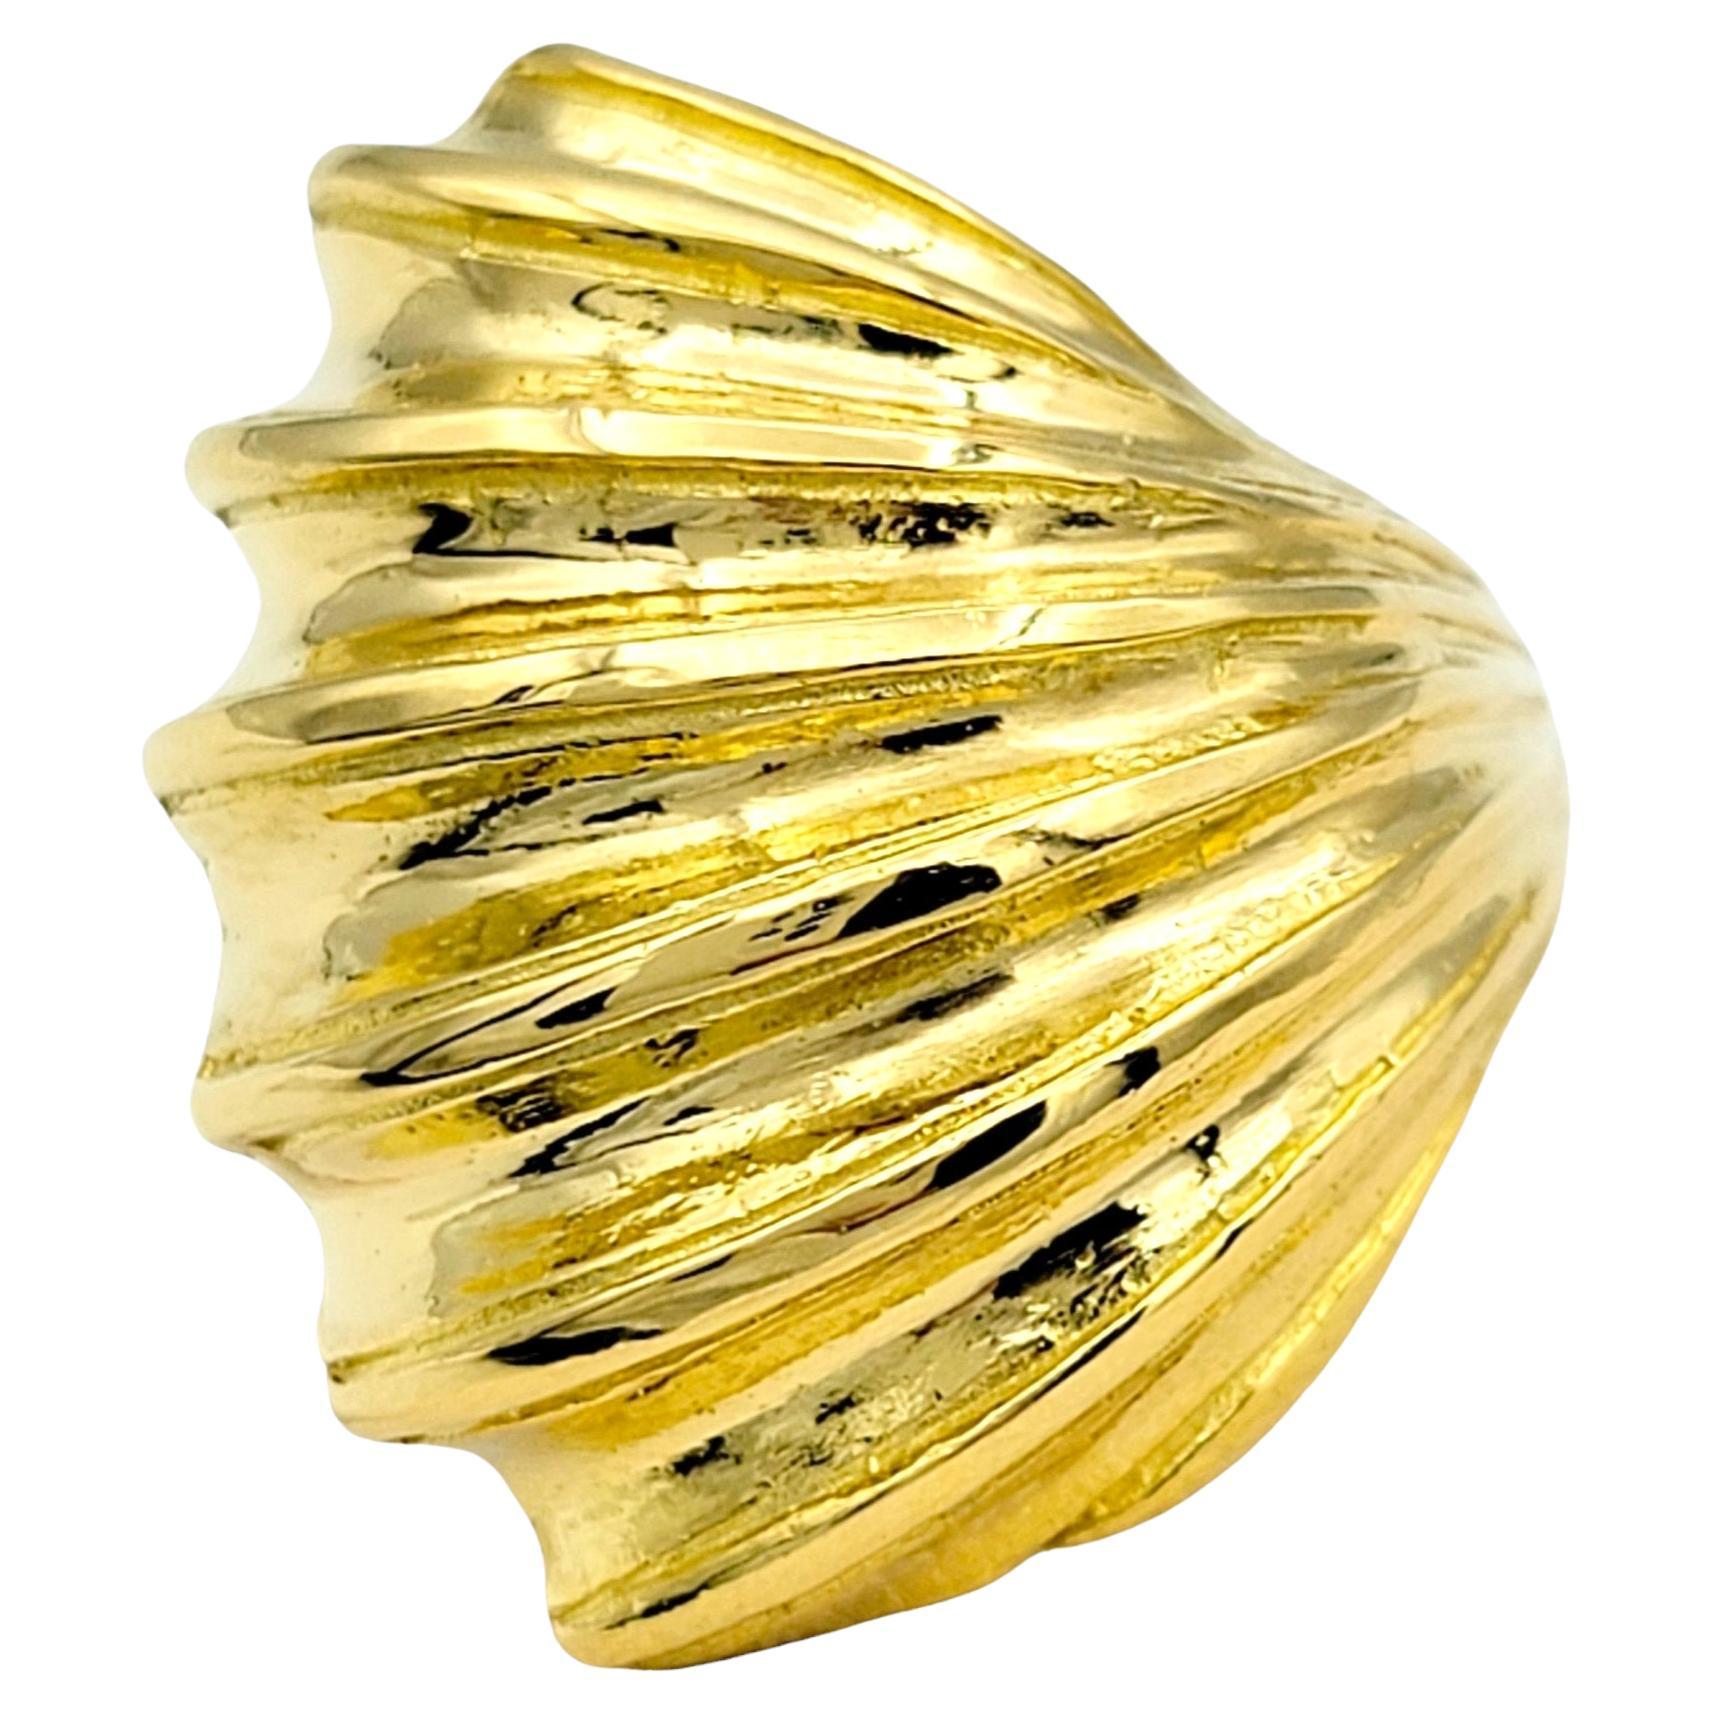 Ring Size: 5.25

This gorgeous Ilias Lalaounis shell design ridged wrap ring, crafted in 22 karat yellow gold, is a stunning piece of jewelry that captures the essence of nature's beauty. Inspired by the intricate patterns and textures of seashells,